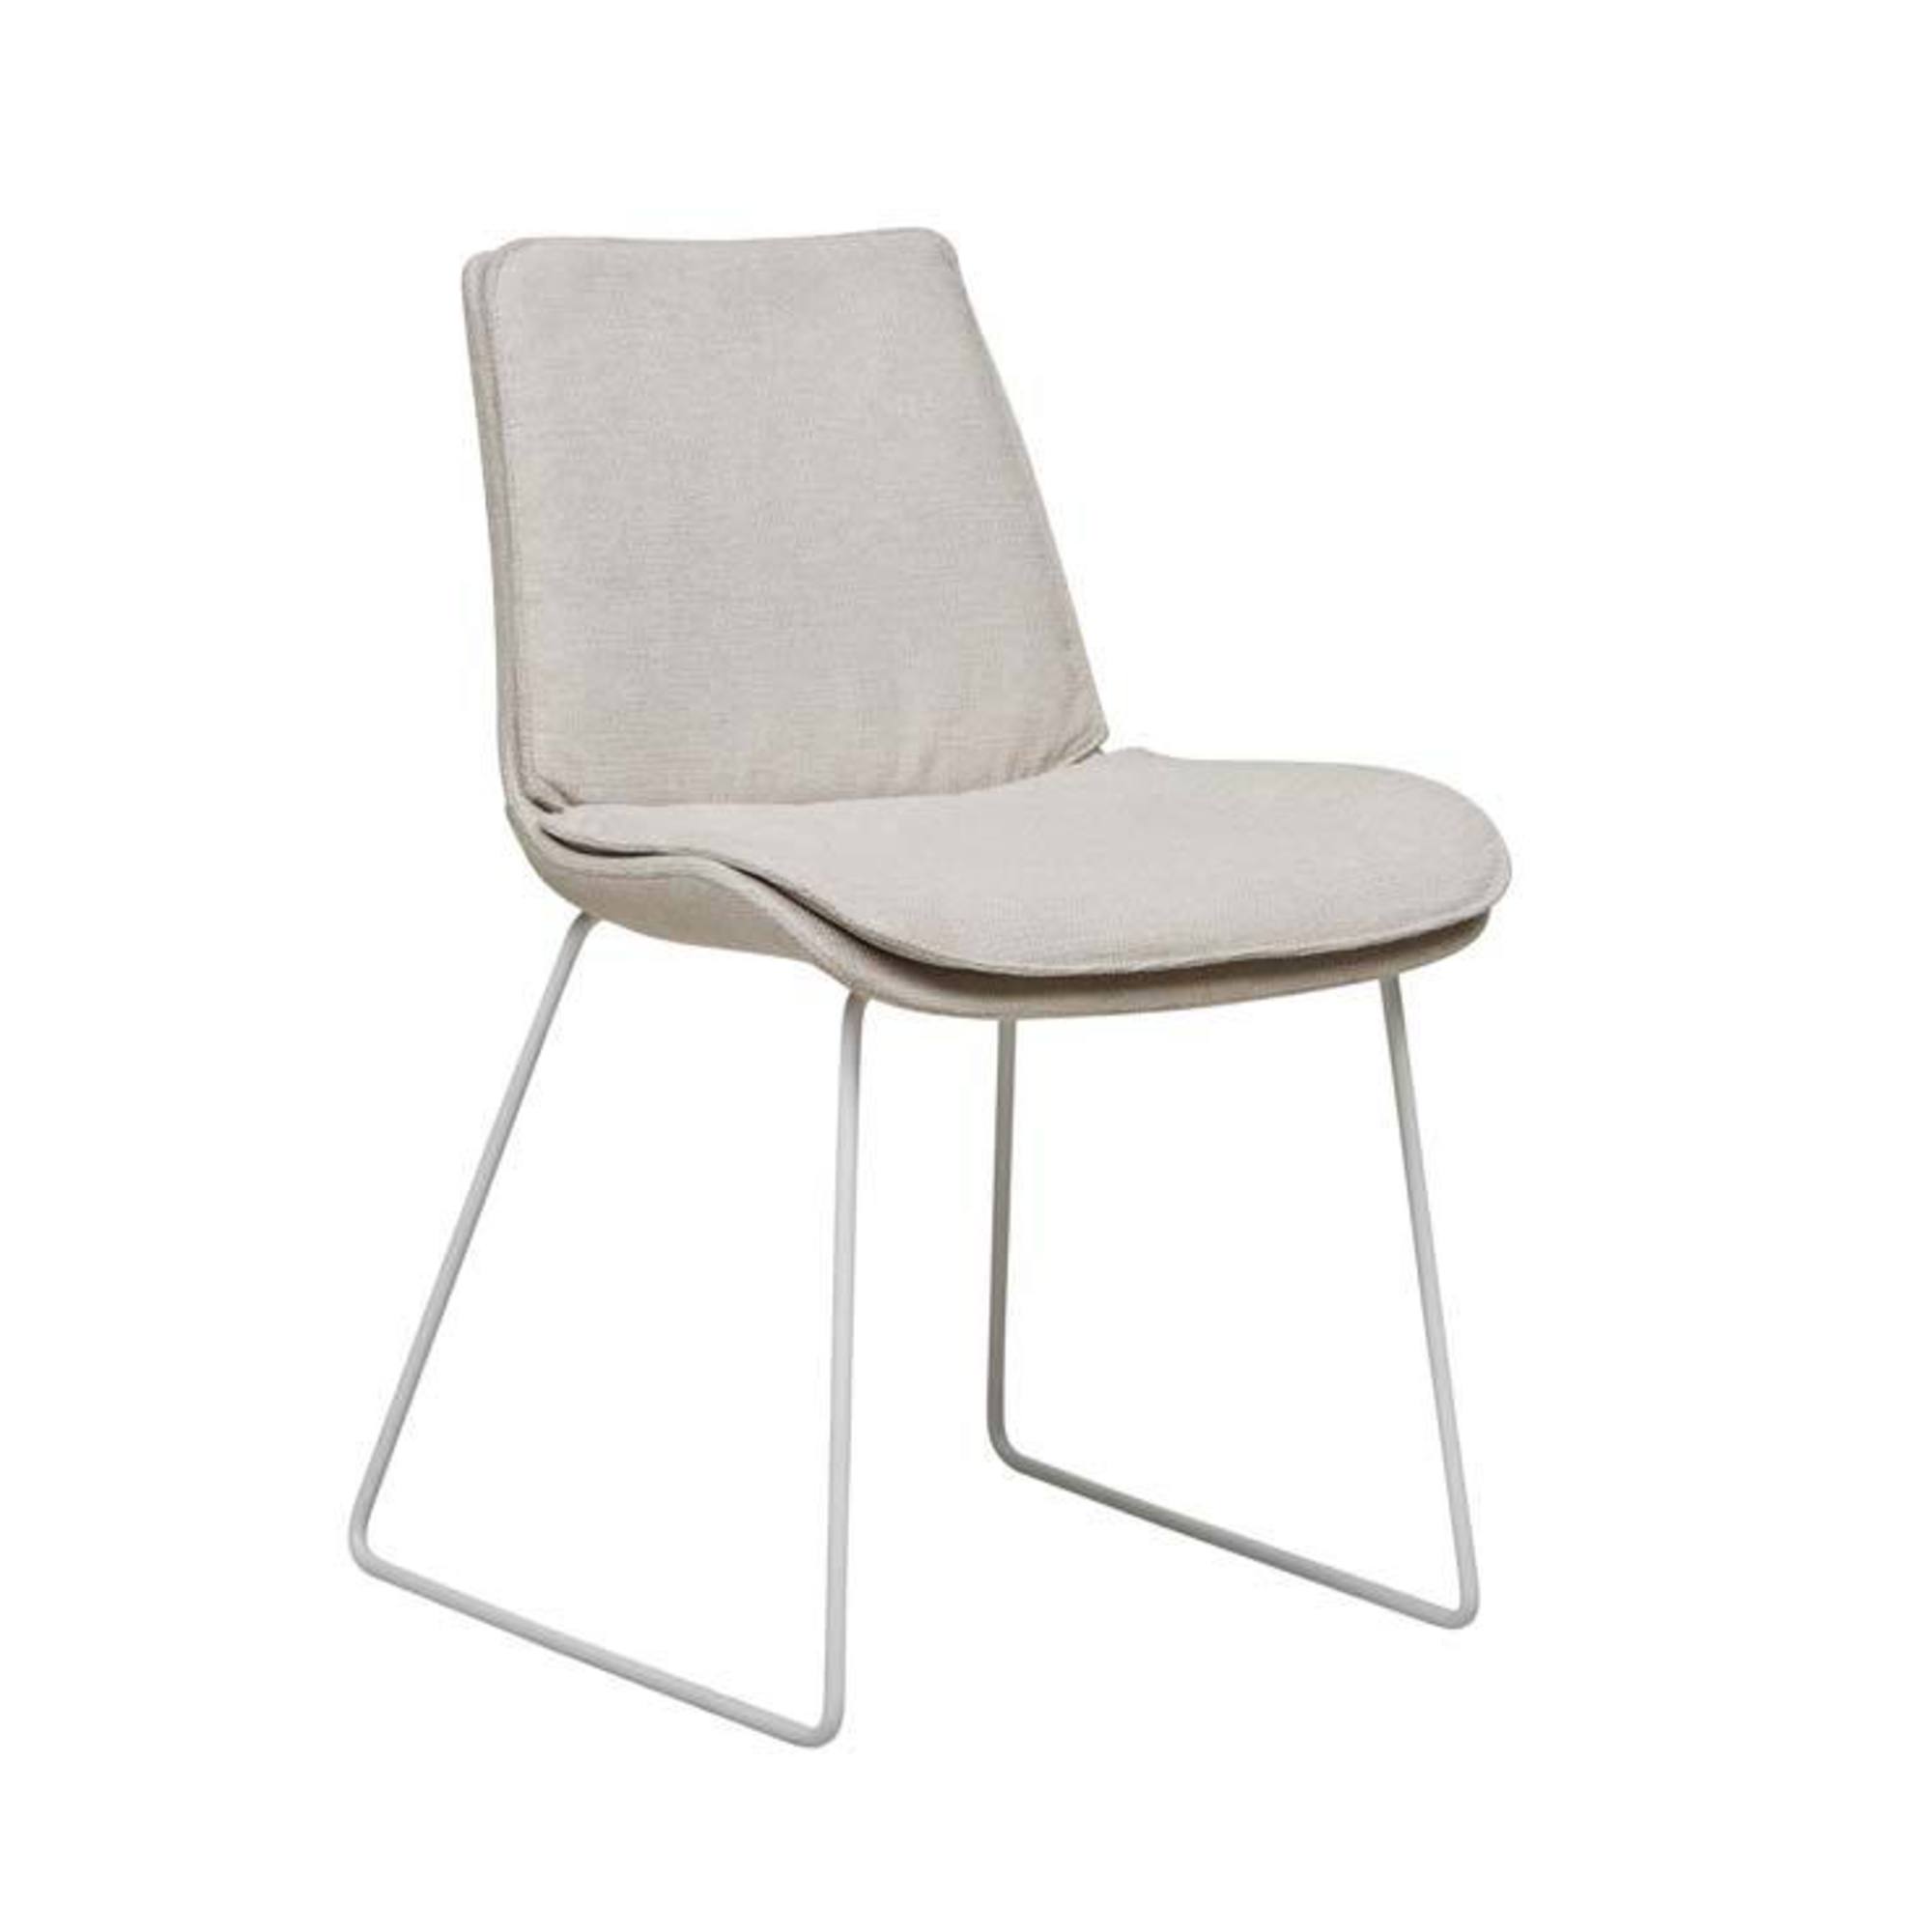 Chase Dining Chair image 17